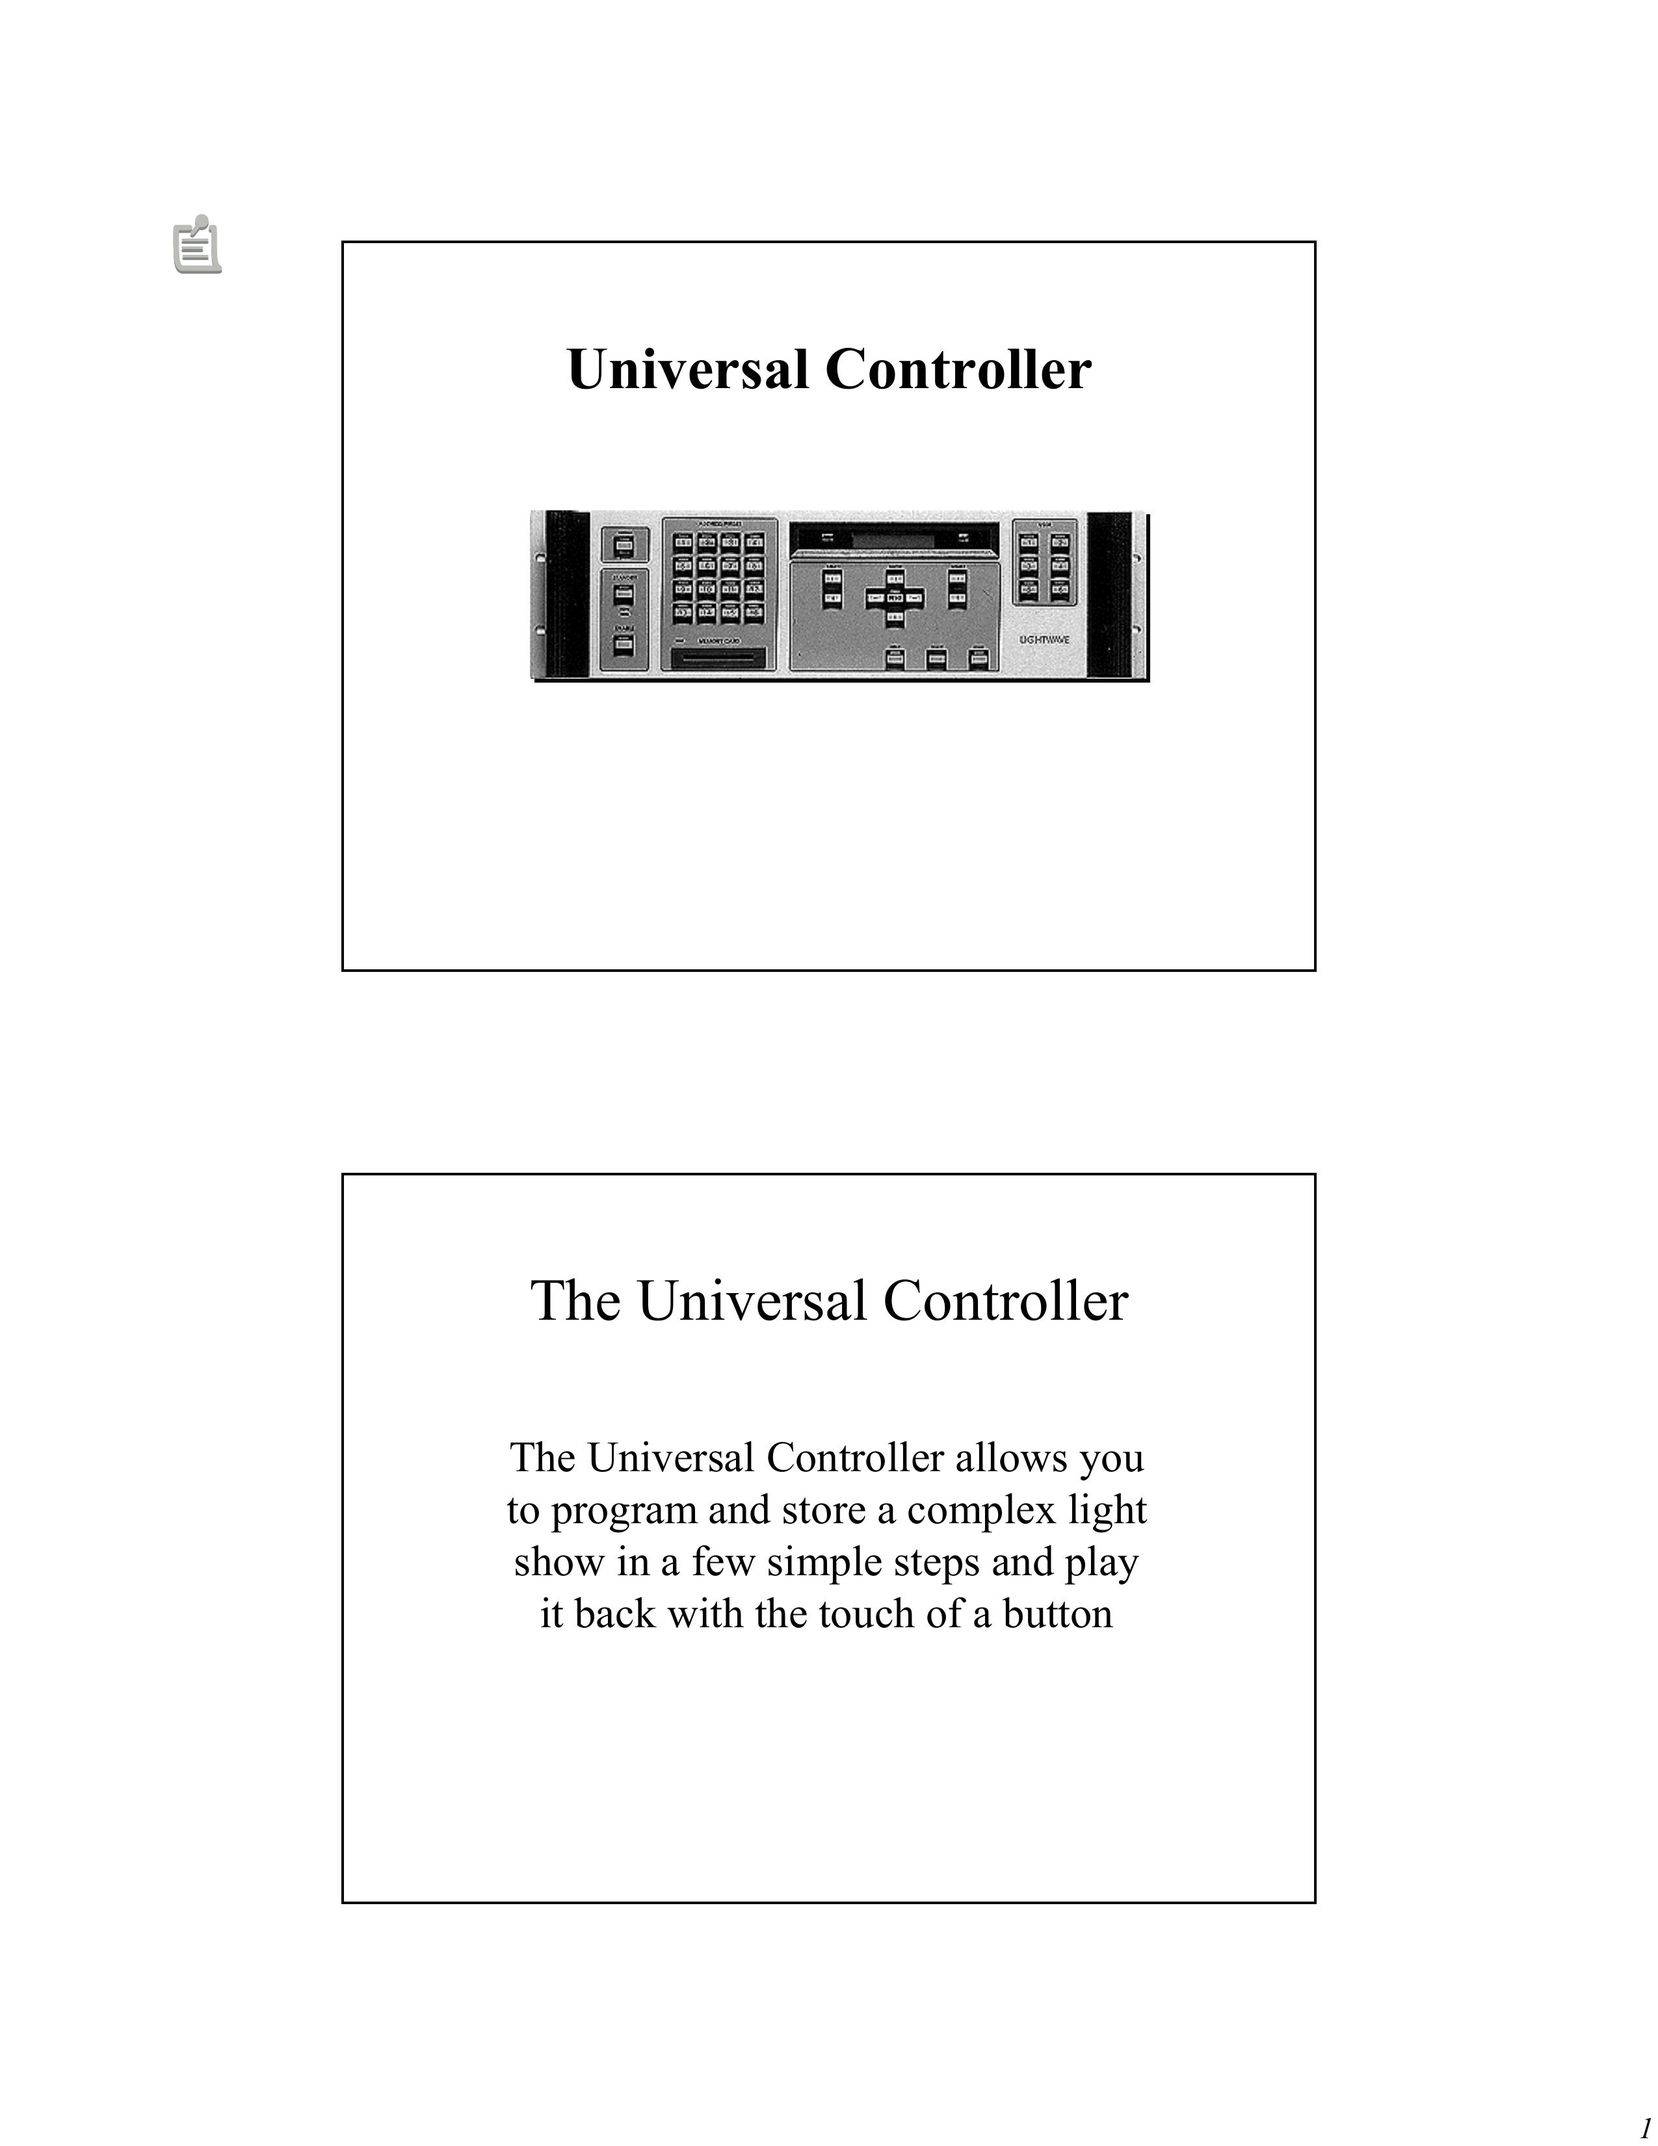 High End Systems Universal Controller Universal Remote User Manual